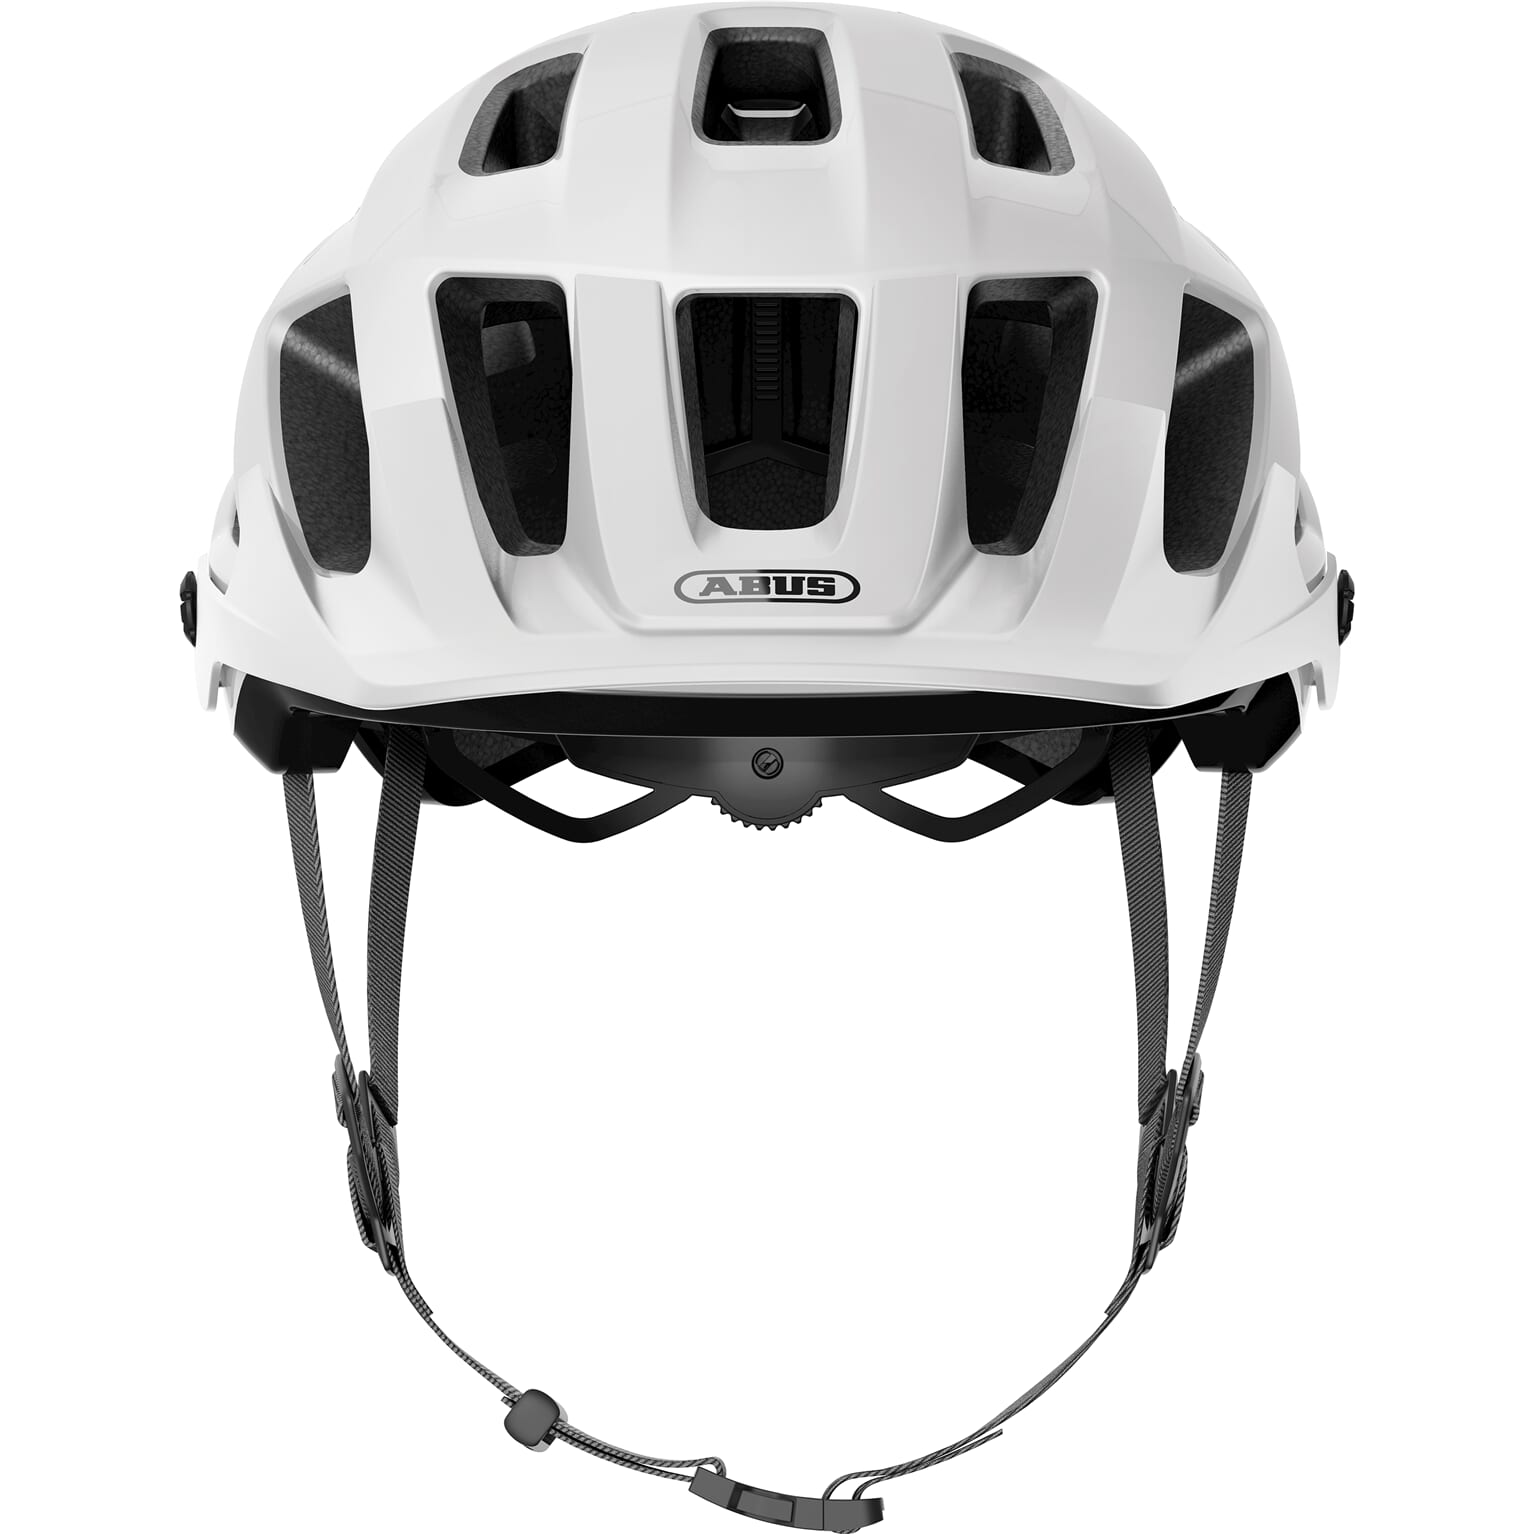 Abus helm Moventor 2.0 QUIN shiny white L 57-61cm